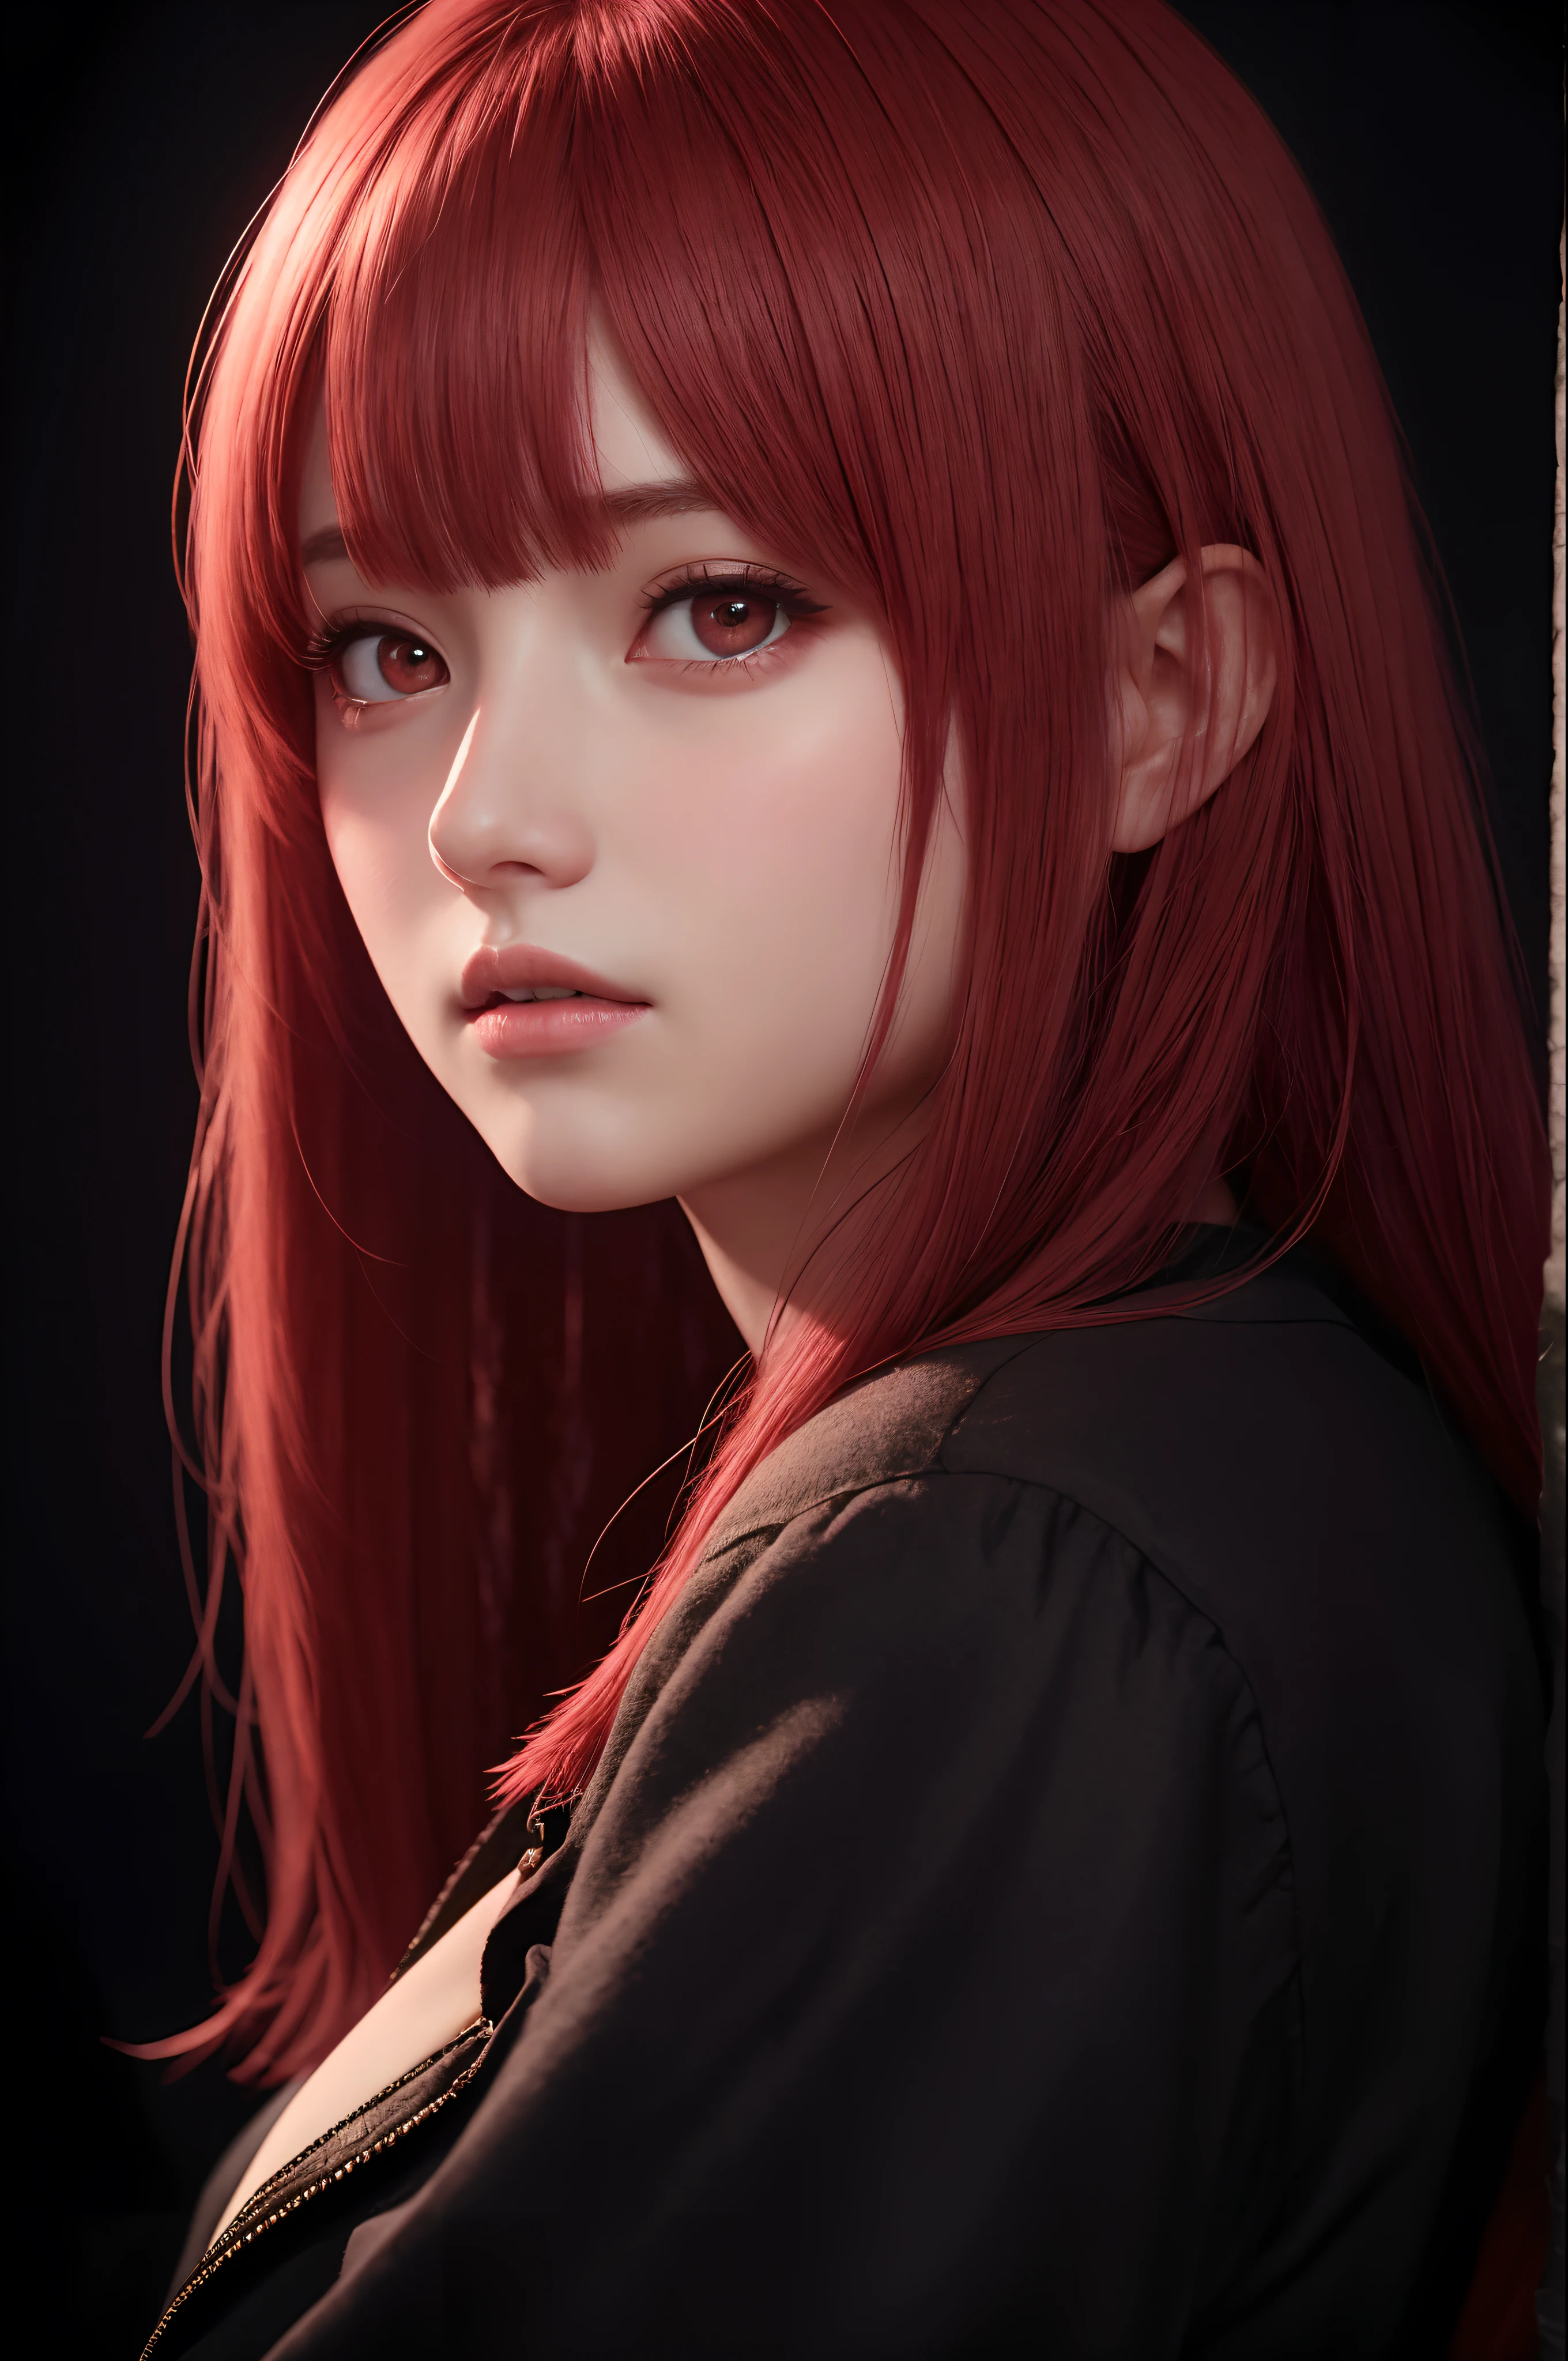 1 girl in, star eye, blush, perfect lighting, Red hair, Red eyes, unreal engine, Side lights, Detailed face, Bang, bright skin, simple background, dark background,